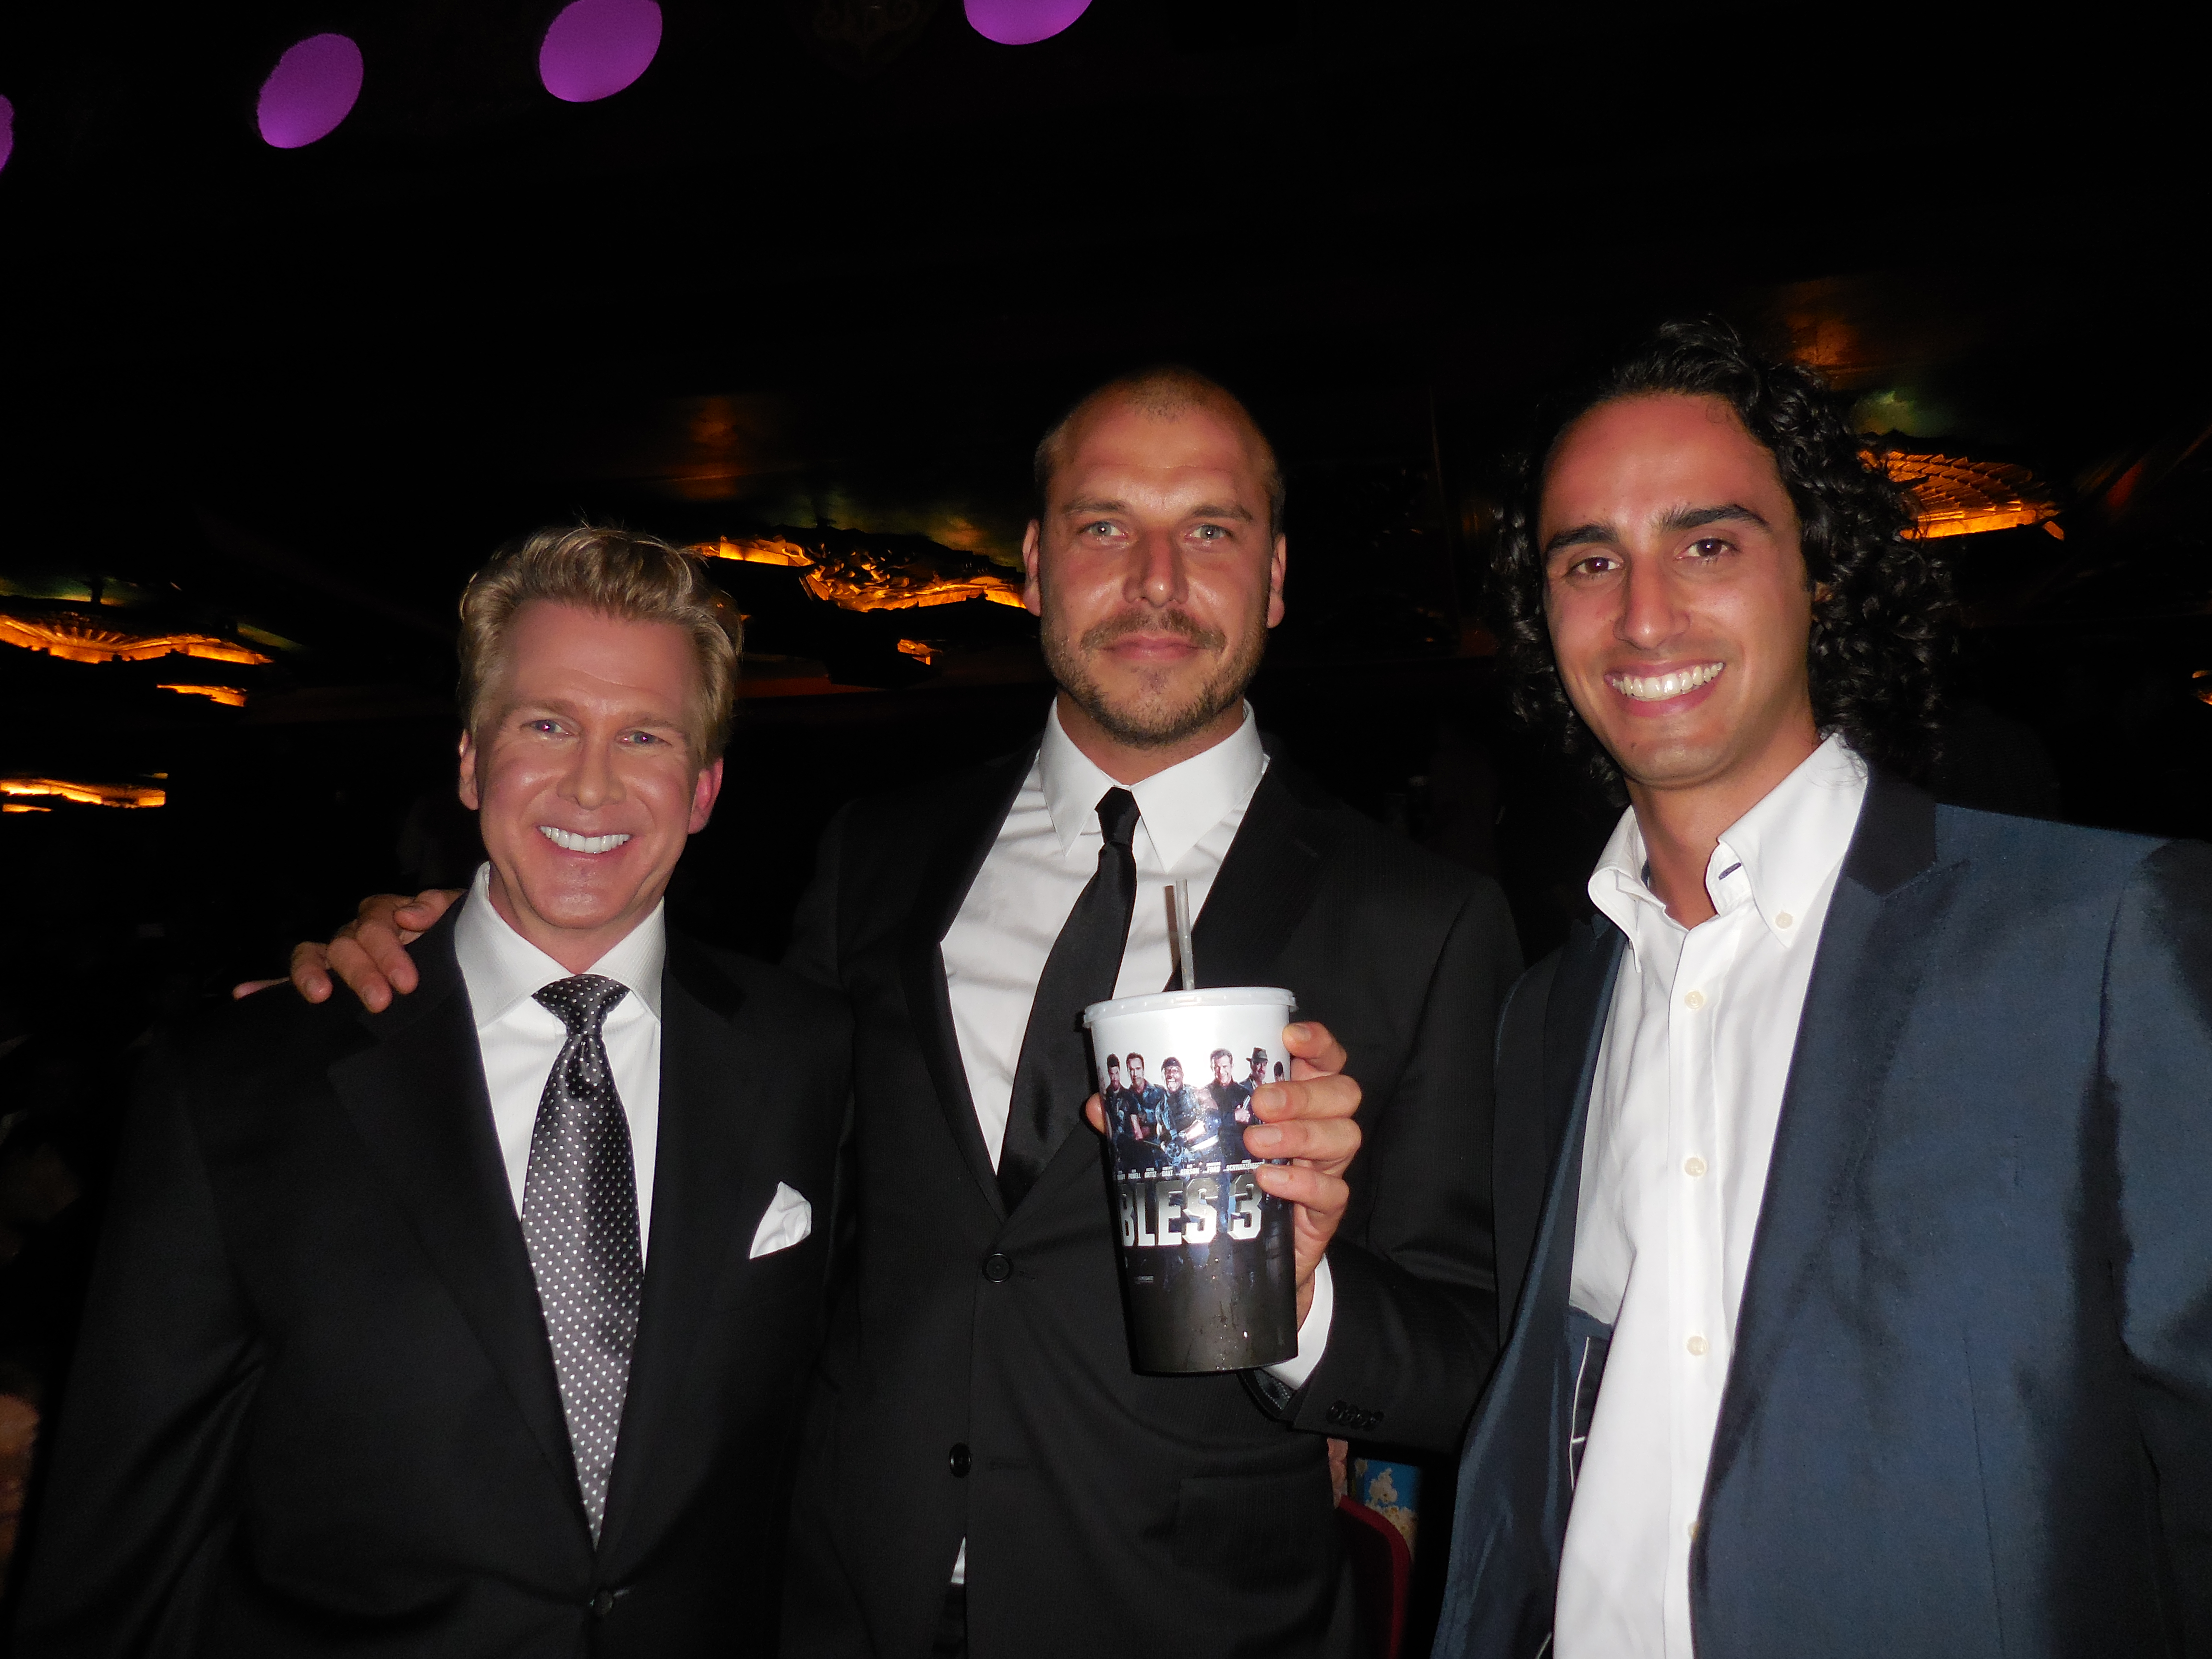 Creighton Rothenberger, director Patrick Hughes and Luke Mazzaferro at The Expendables 3 premiere - TCL Chinese Theatre on August 15, 2014 in Hollywood, California.